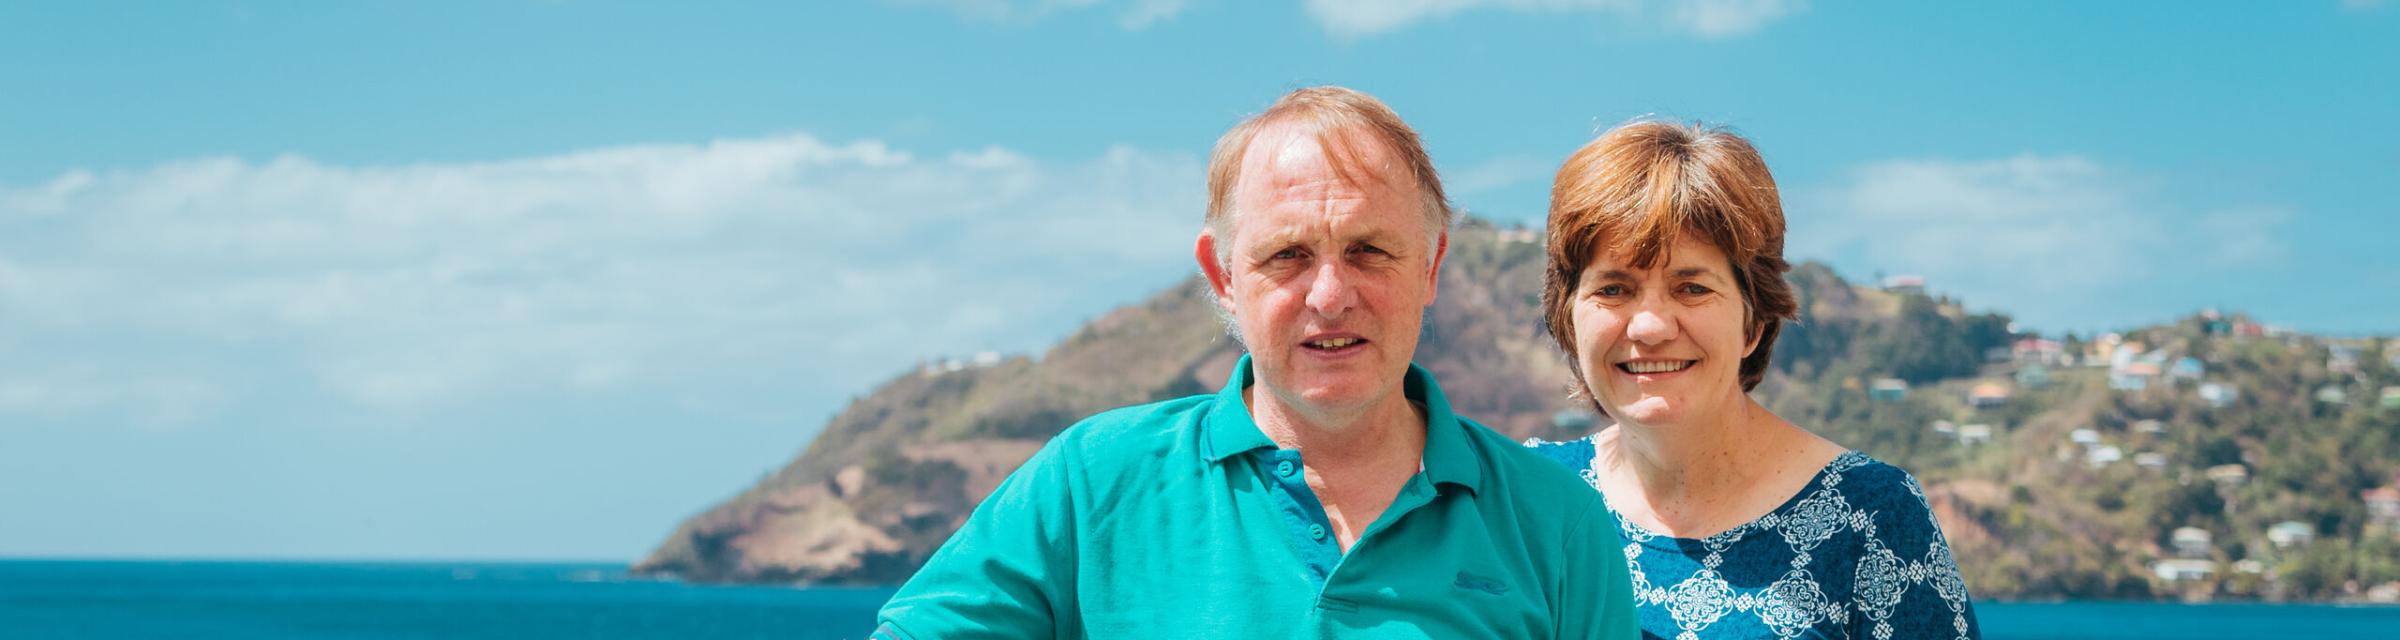 Kingstown, Saint Vincent and the Grenadines :: David and Jan Arrowsmith (UK) are developing an adult education resource.